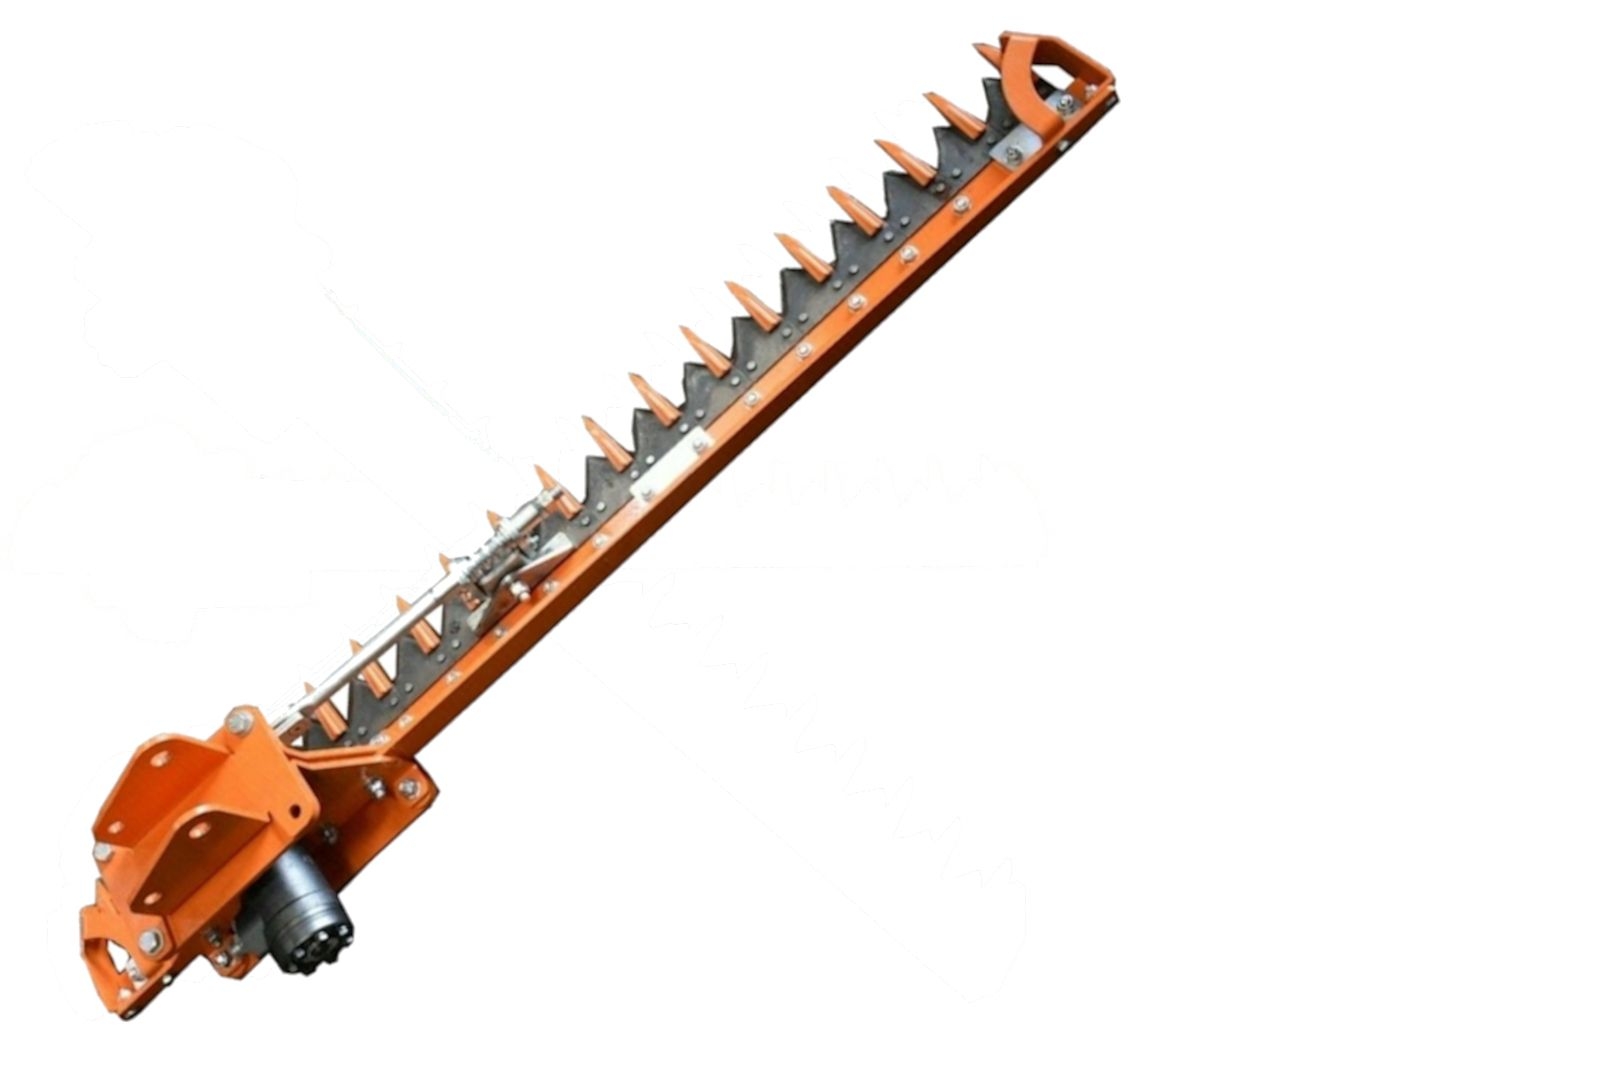 MDL Mini Digger – Excavator Hedge Cutter Attachment – Manufactured in Britain. – 1.6 Hedge Trimmer Attachment – Hedge Cutting – 3 Year Warranty – MDL